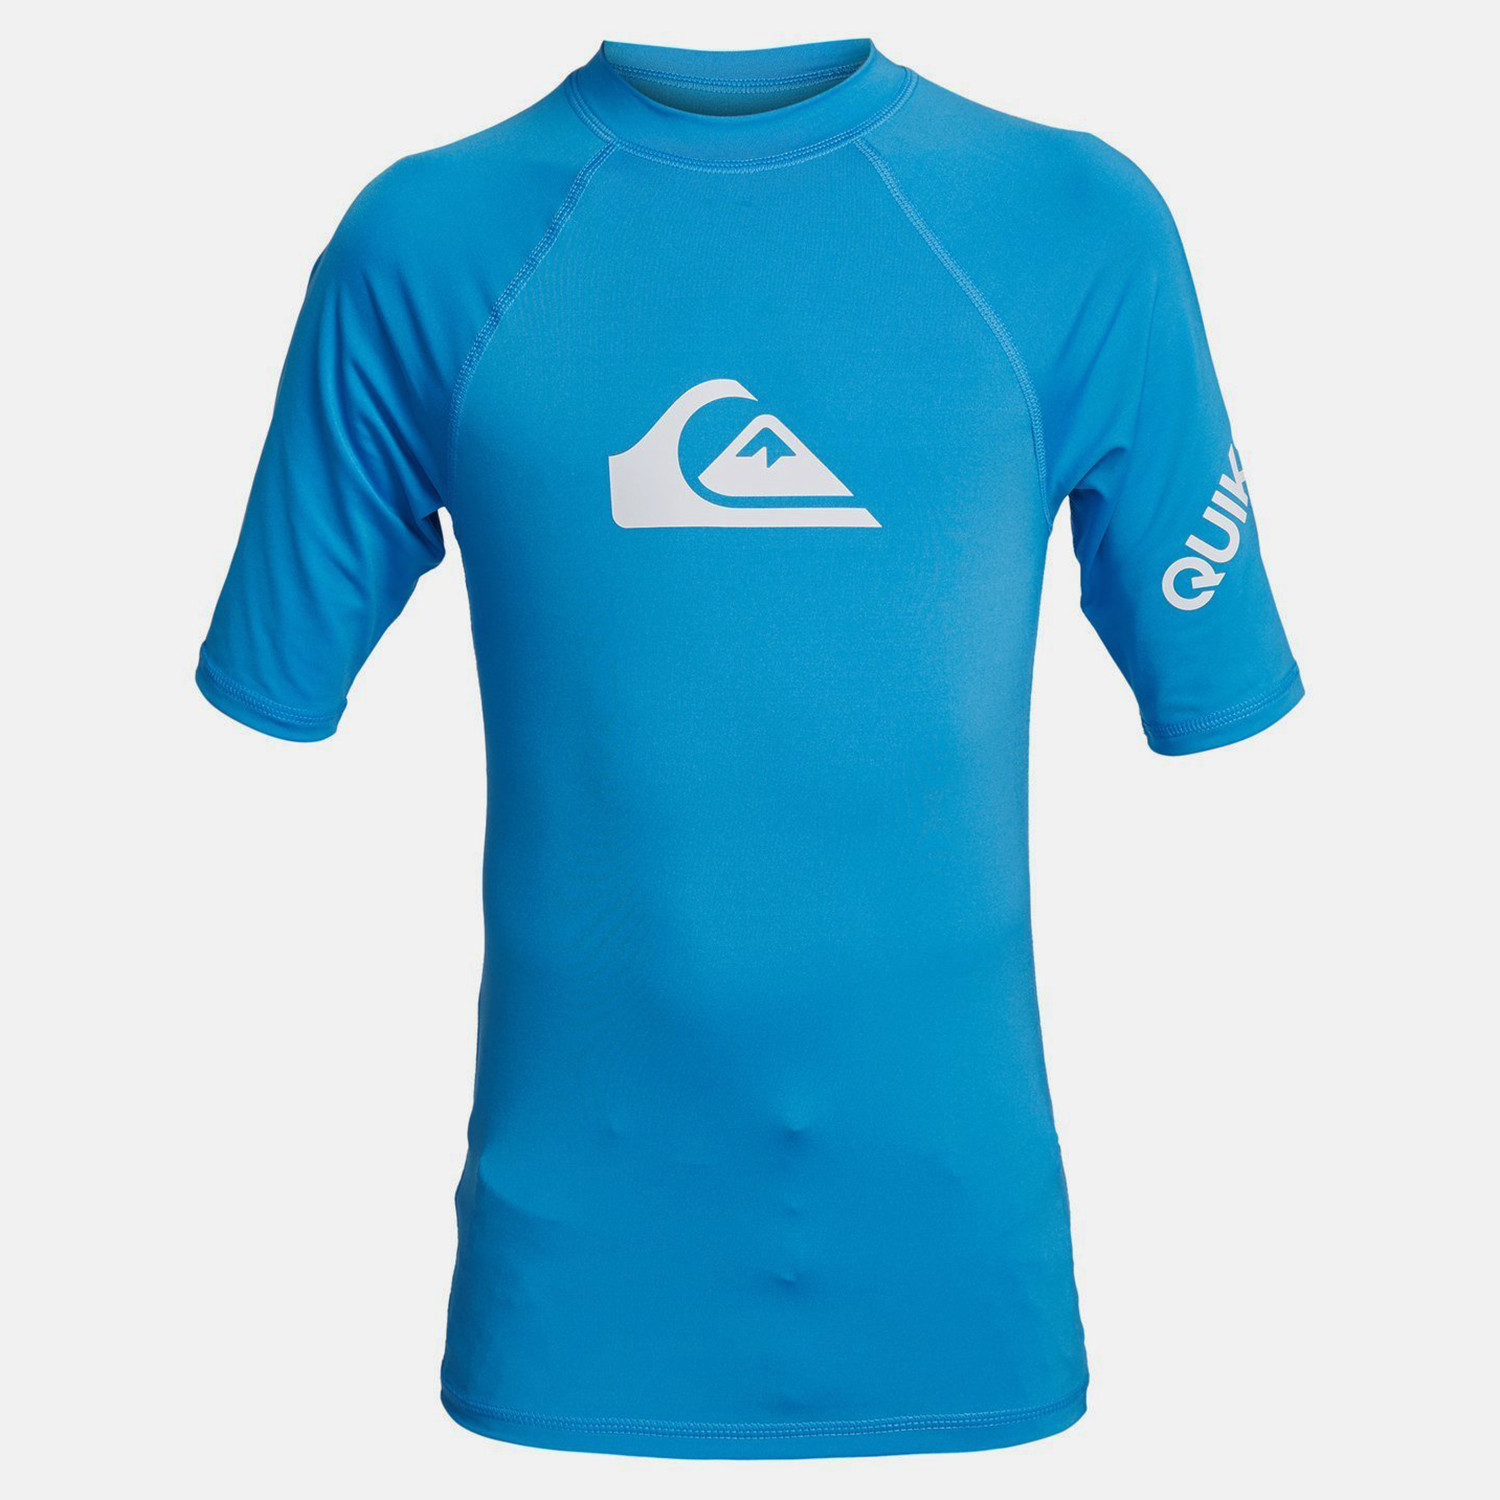 Quiksilver All Time Παιδικό UV T-shirt (9000050407_2816)